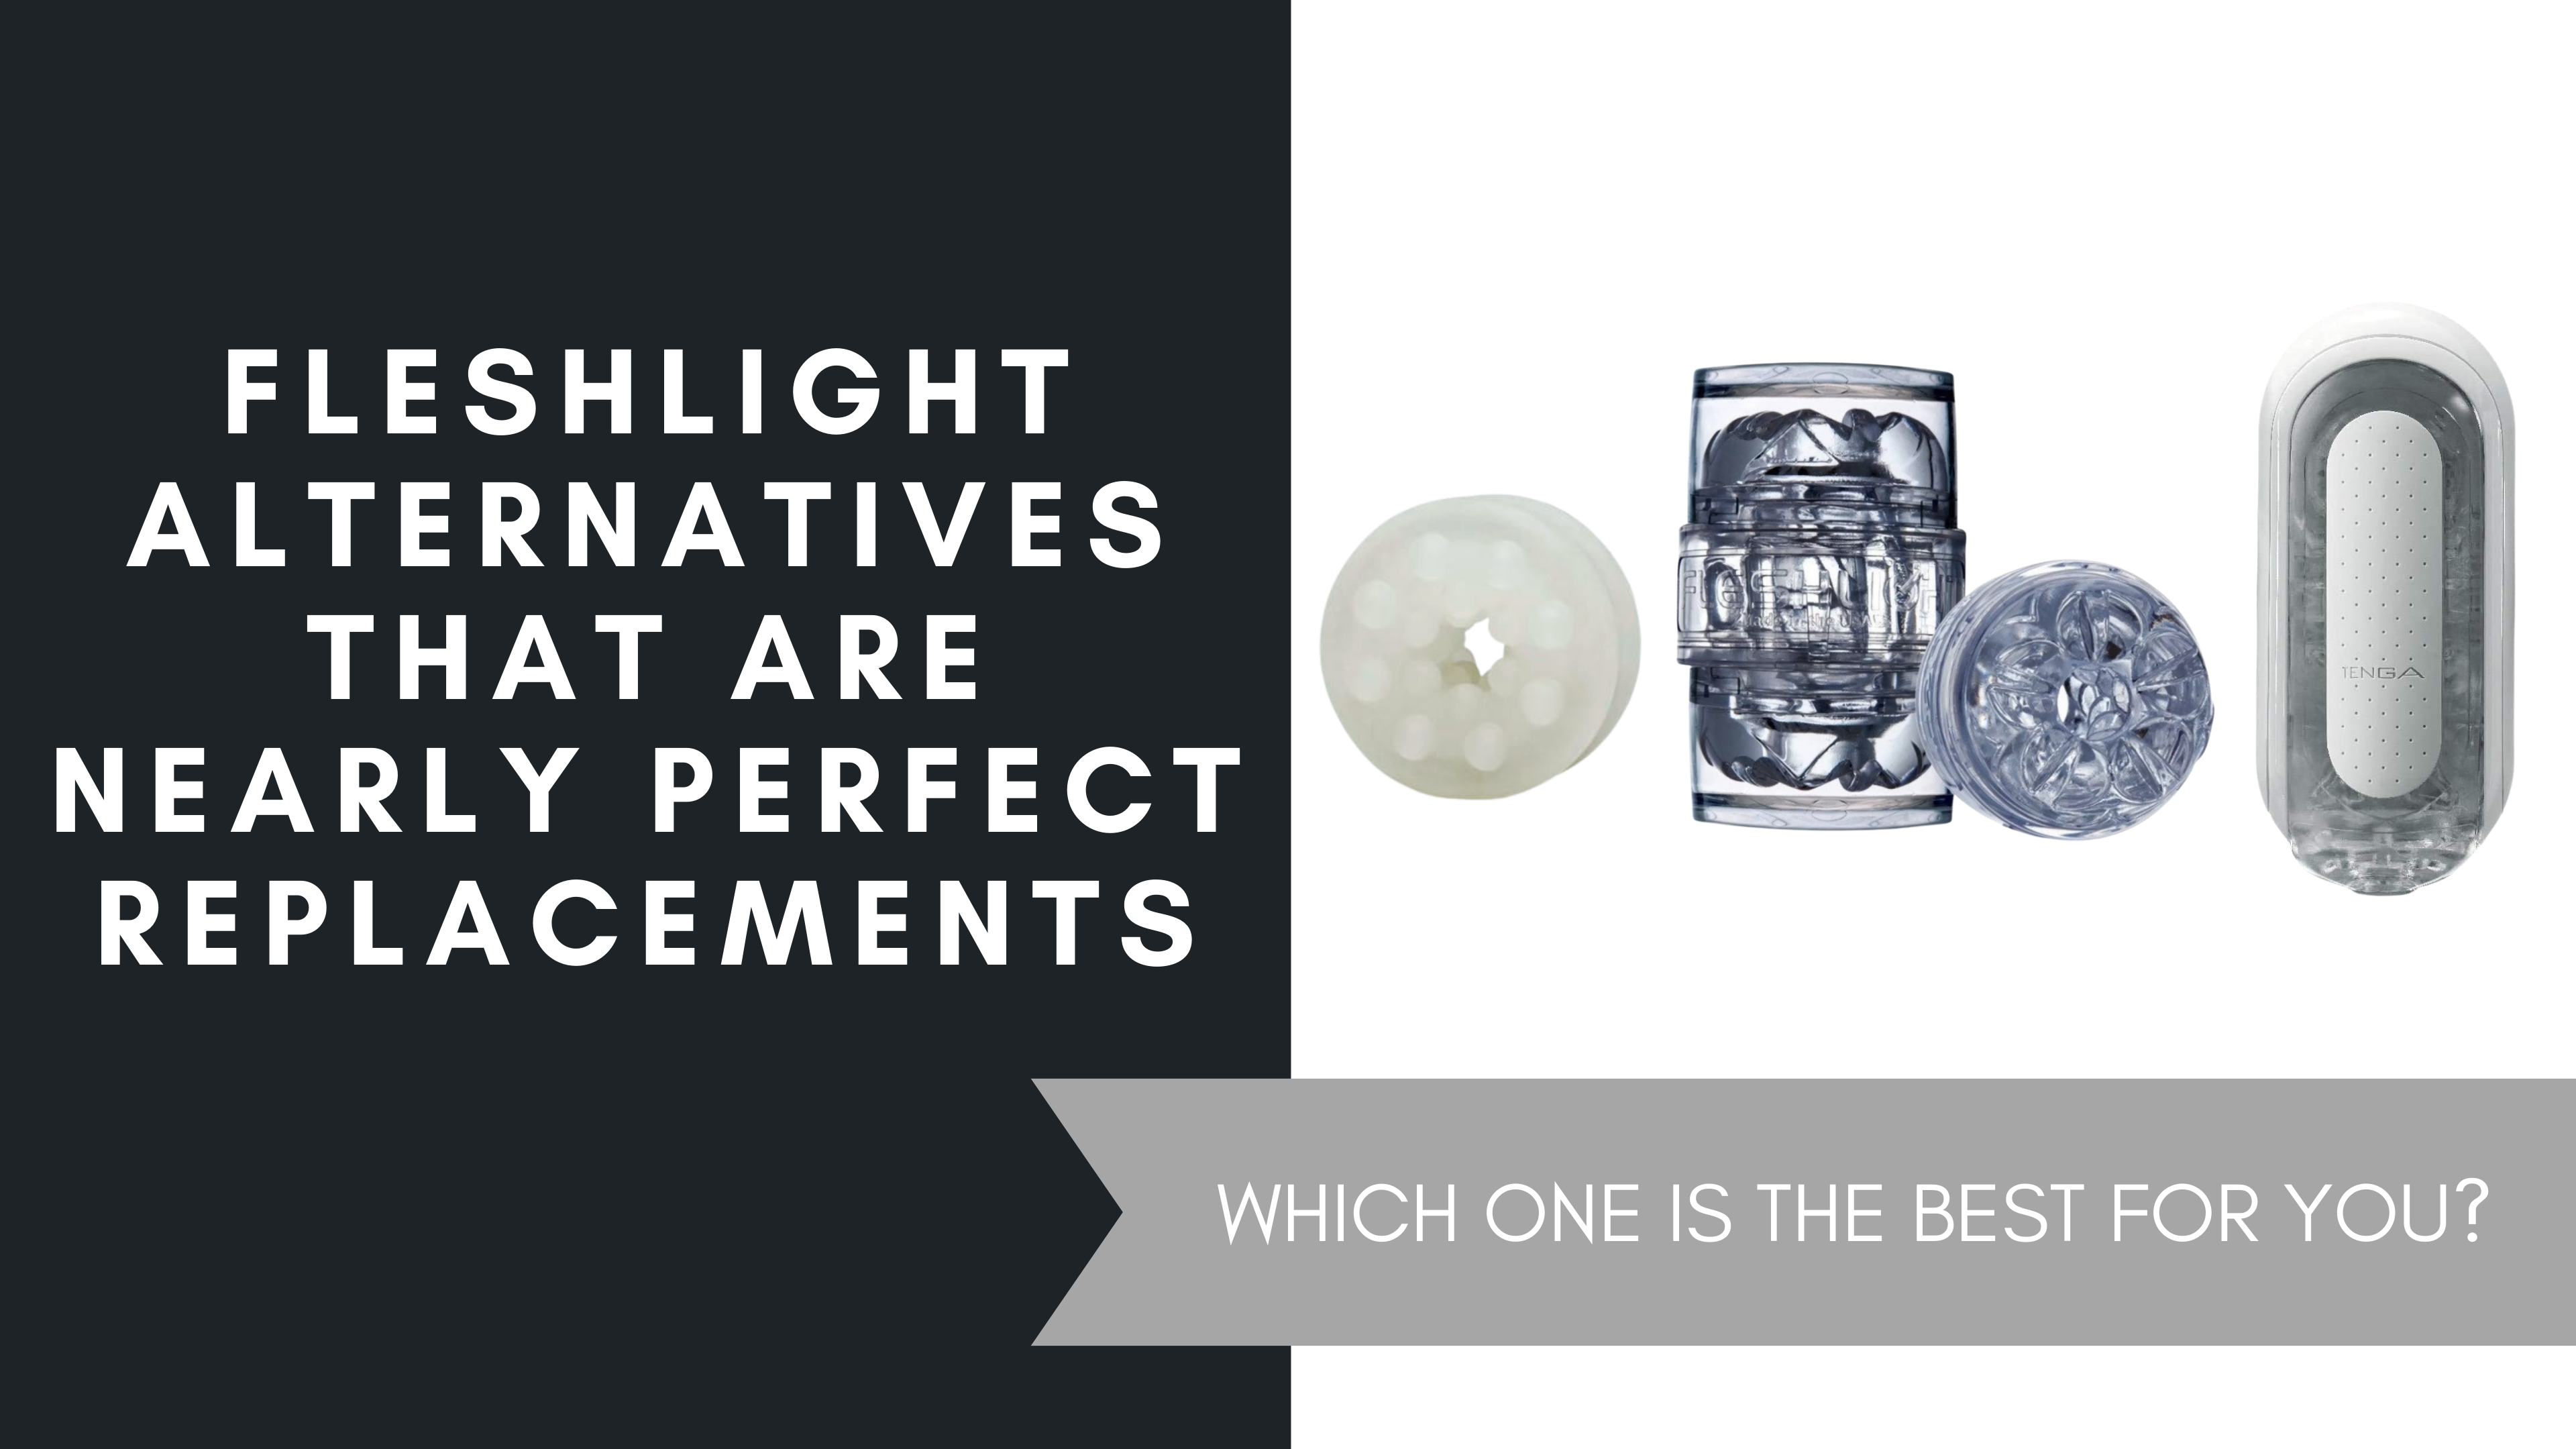 Fleshlight Alternatives That Are Nearly Perfect Replacements